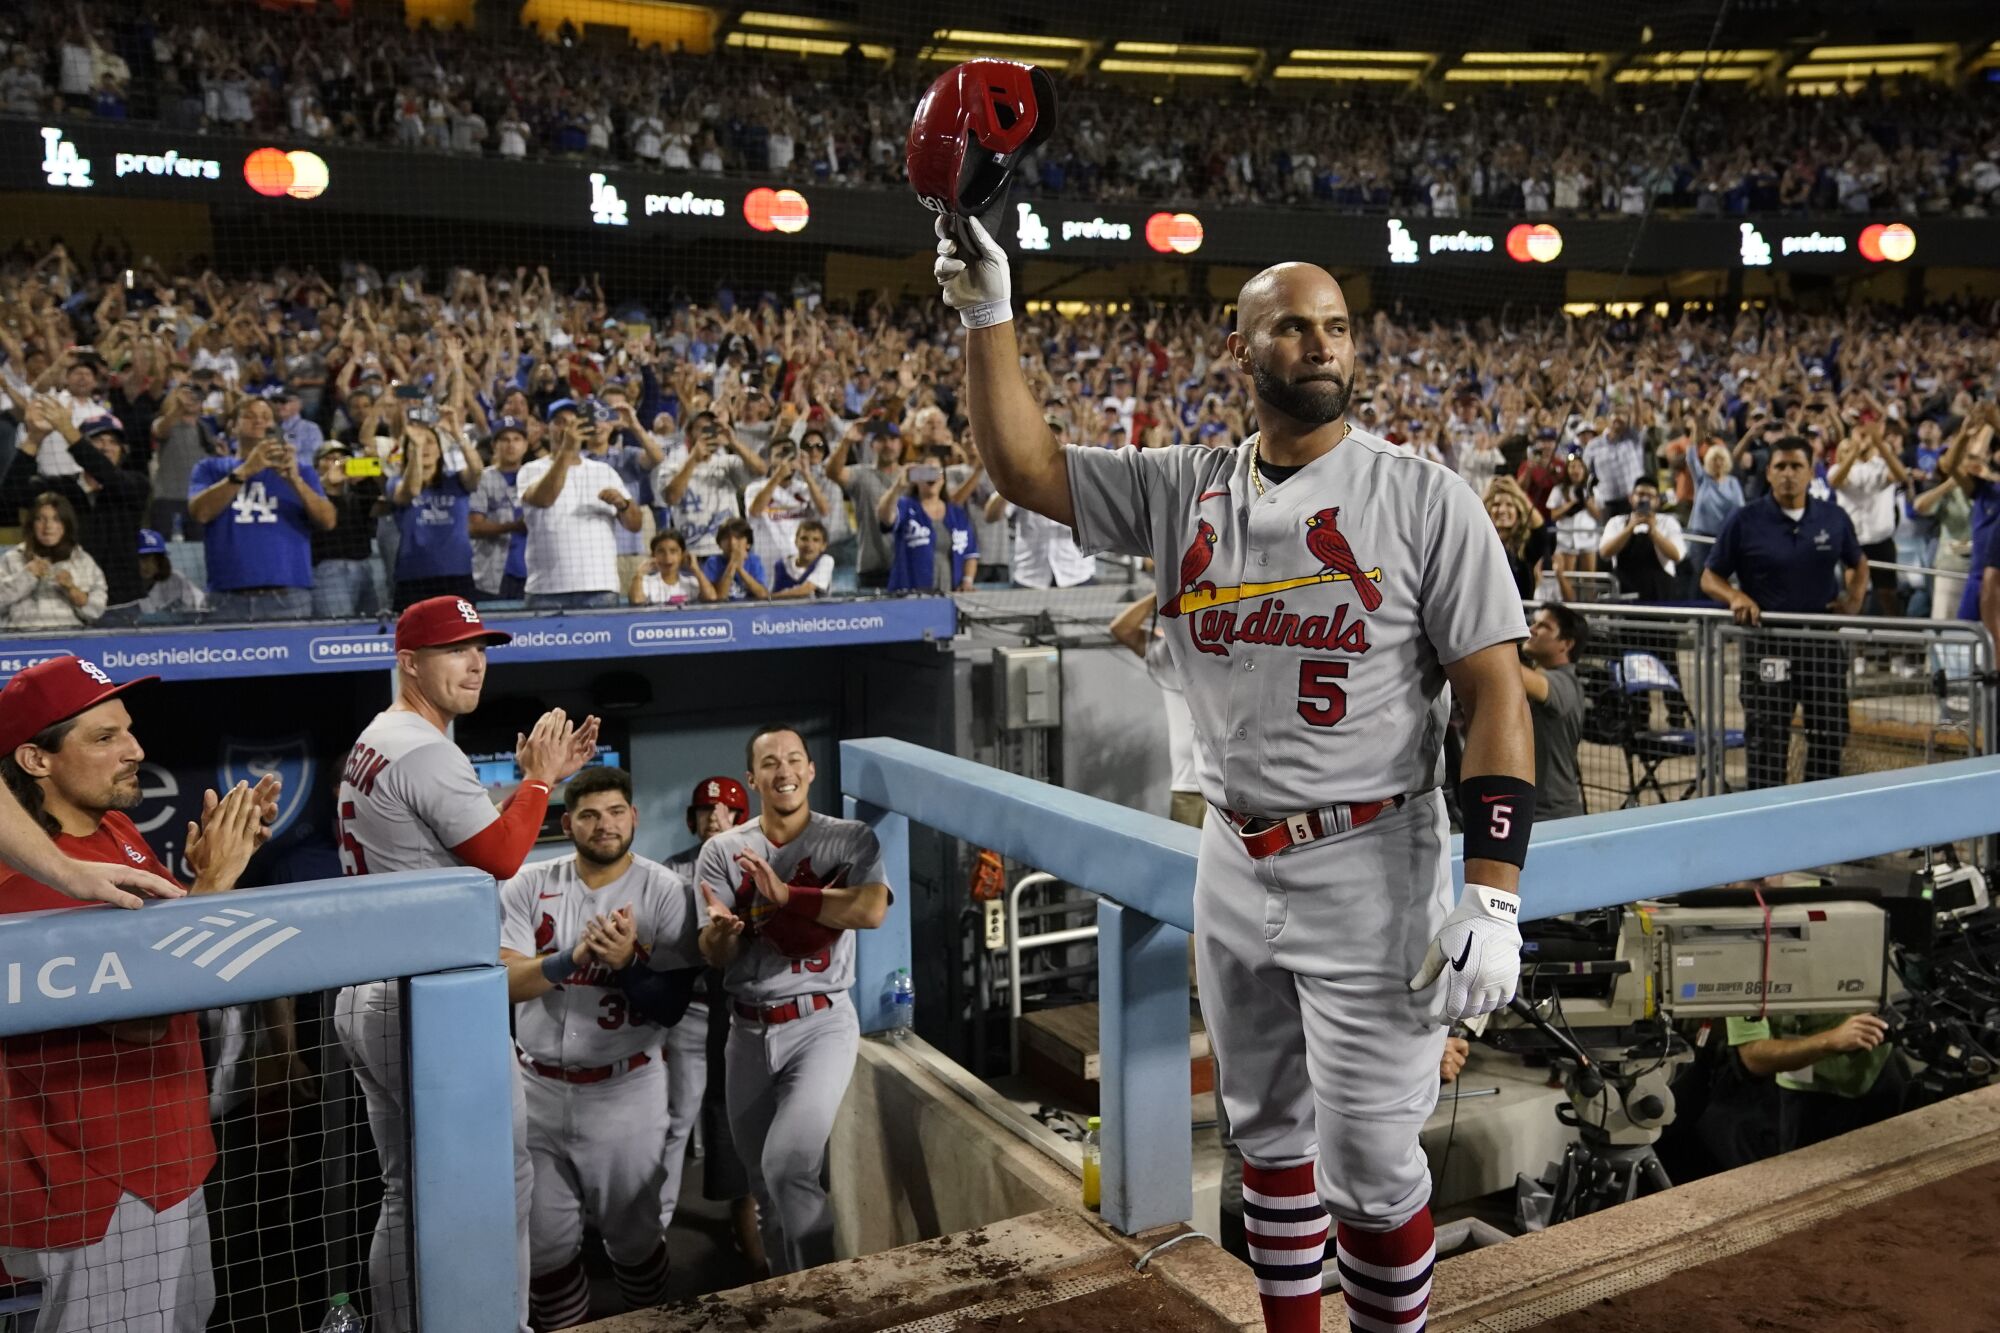 stone. St. Louis Cardinals designated hitter Albert Pujols waves to fans as he receives the honor.